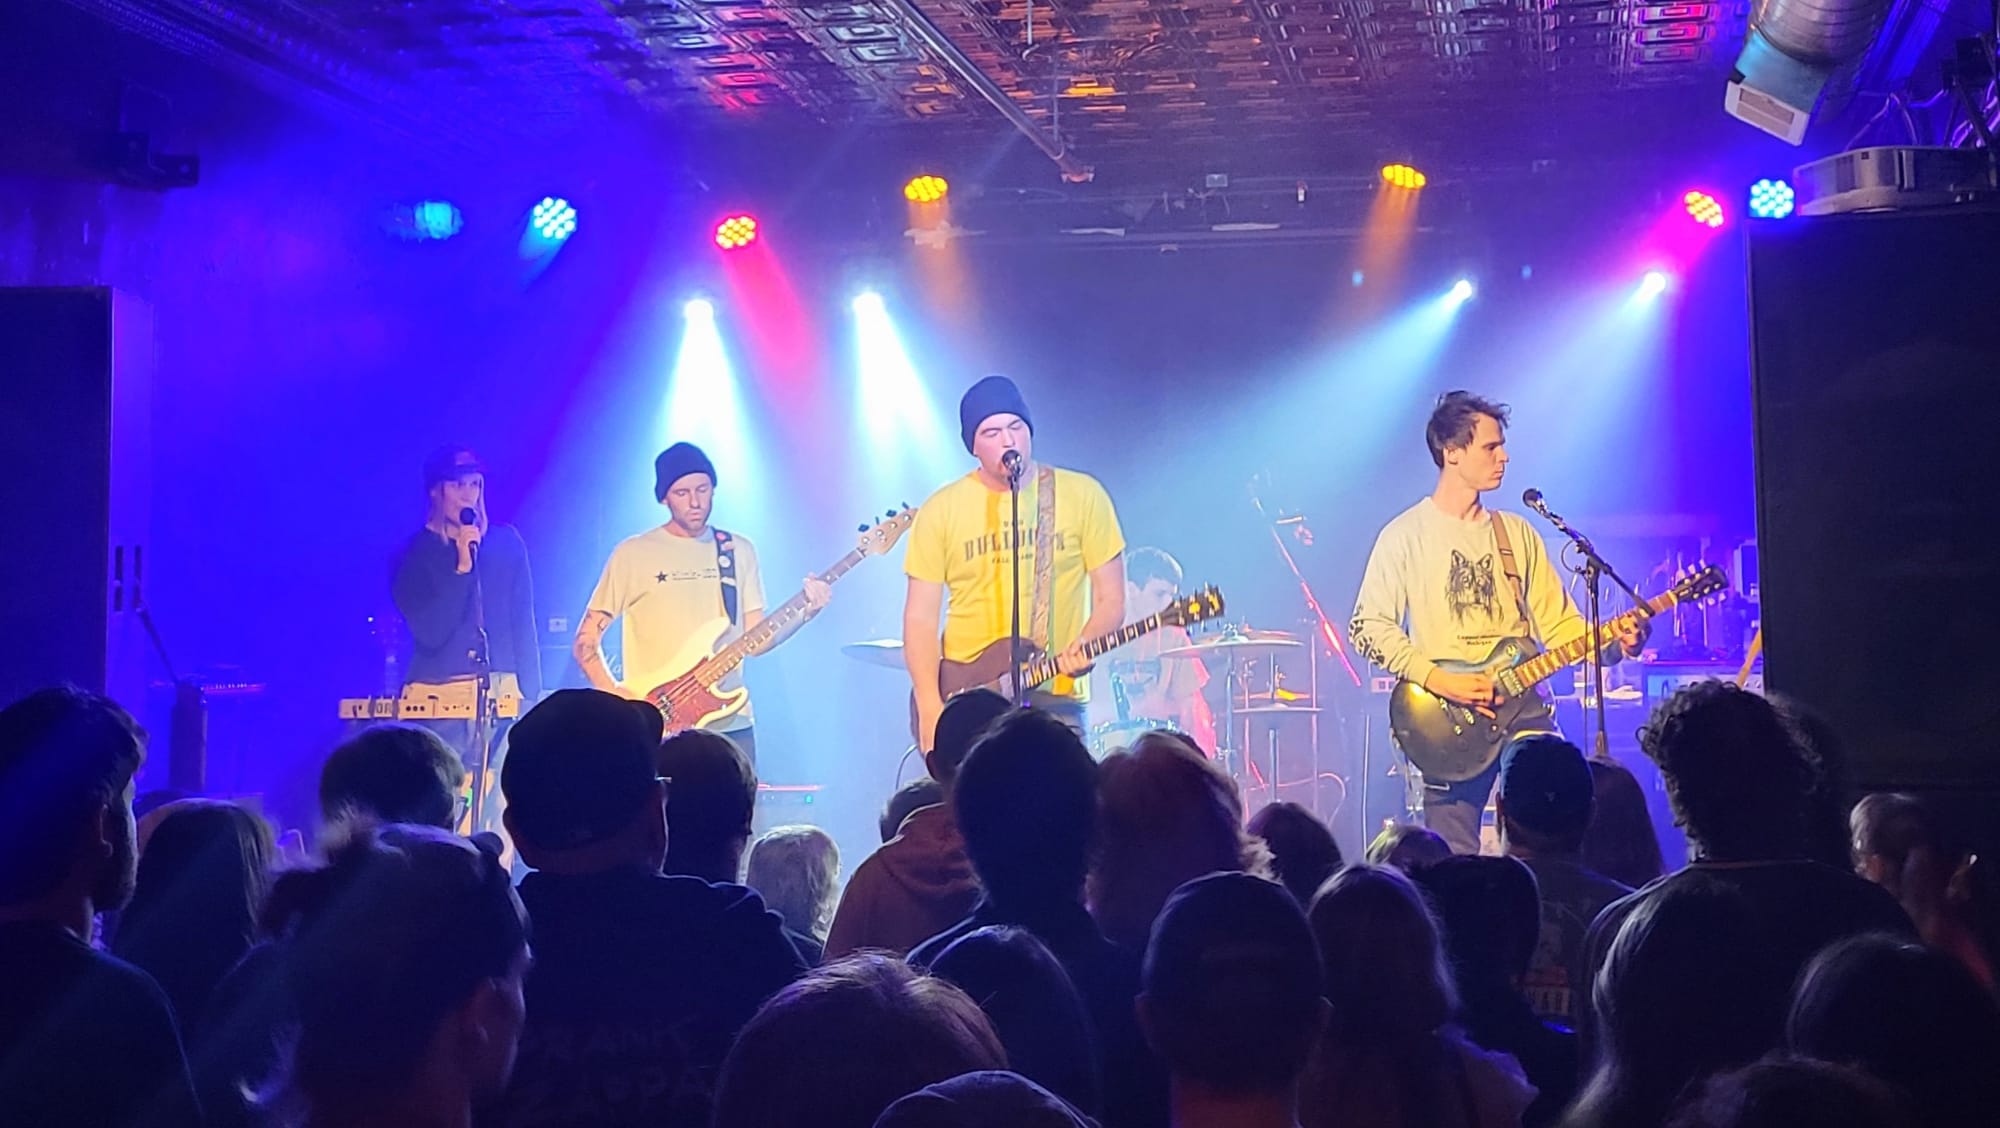 10 thoughts on my first Joyce Manor show (Feat. Shawn Cooke)